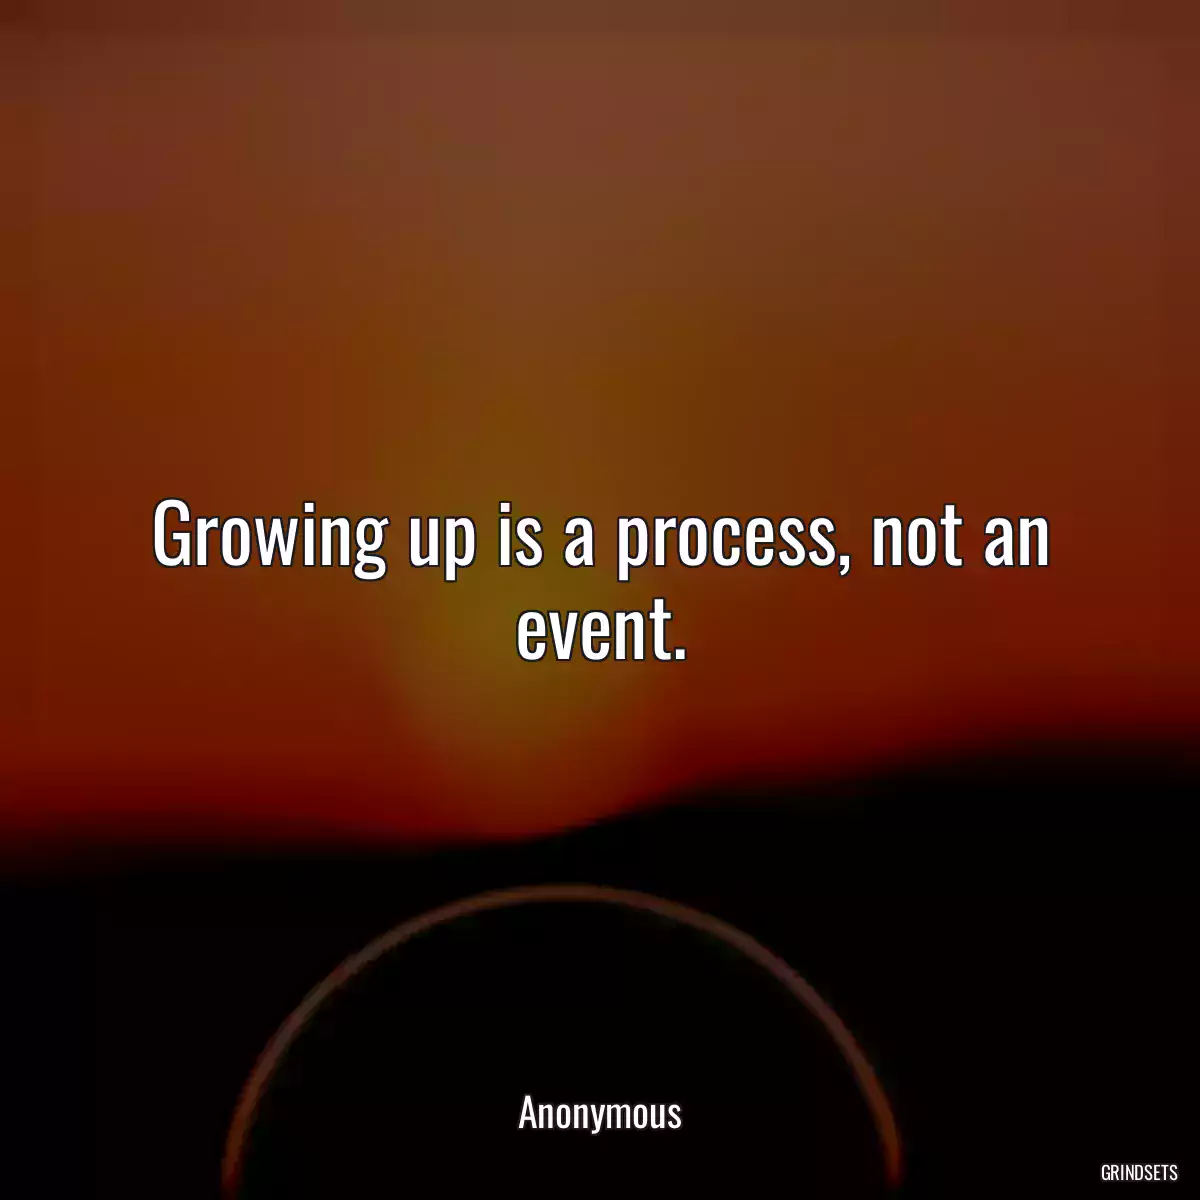 Growing up is a process, not an event.